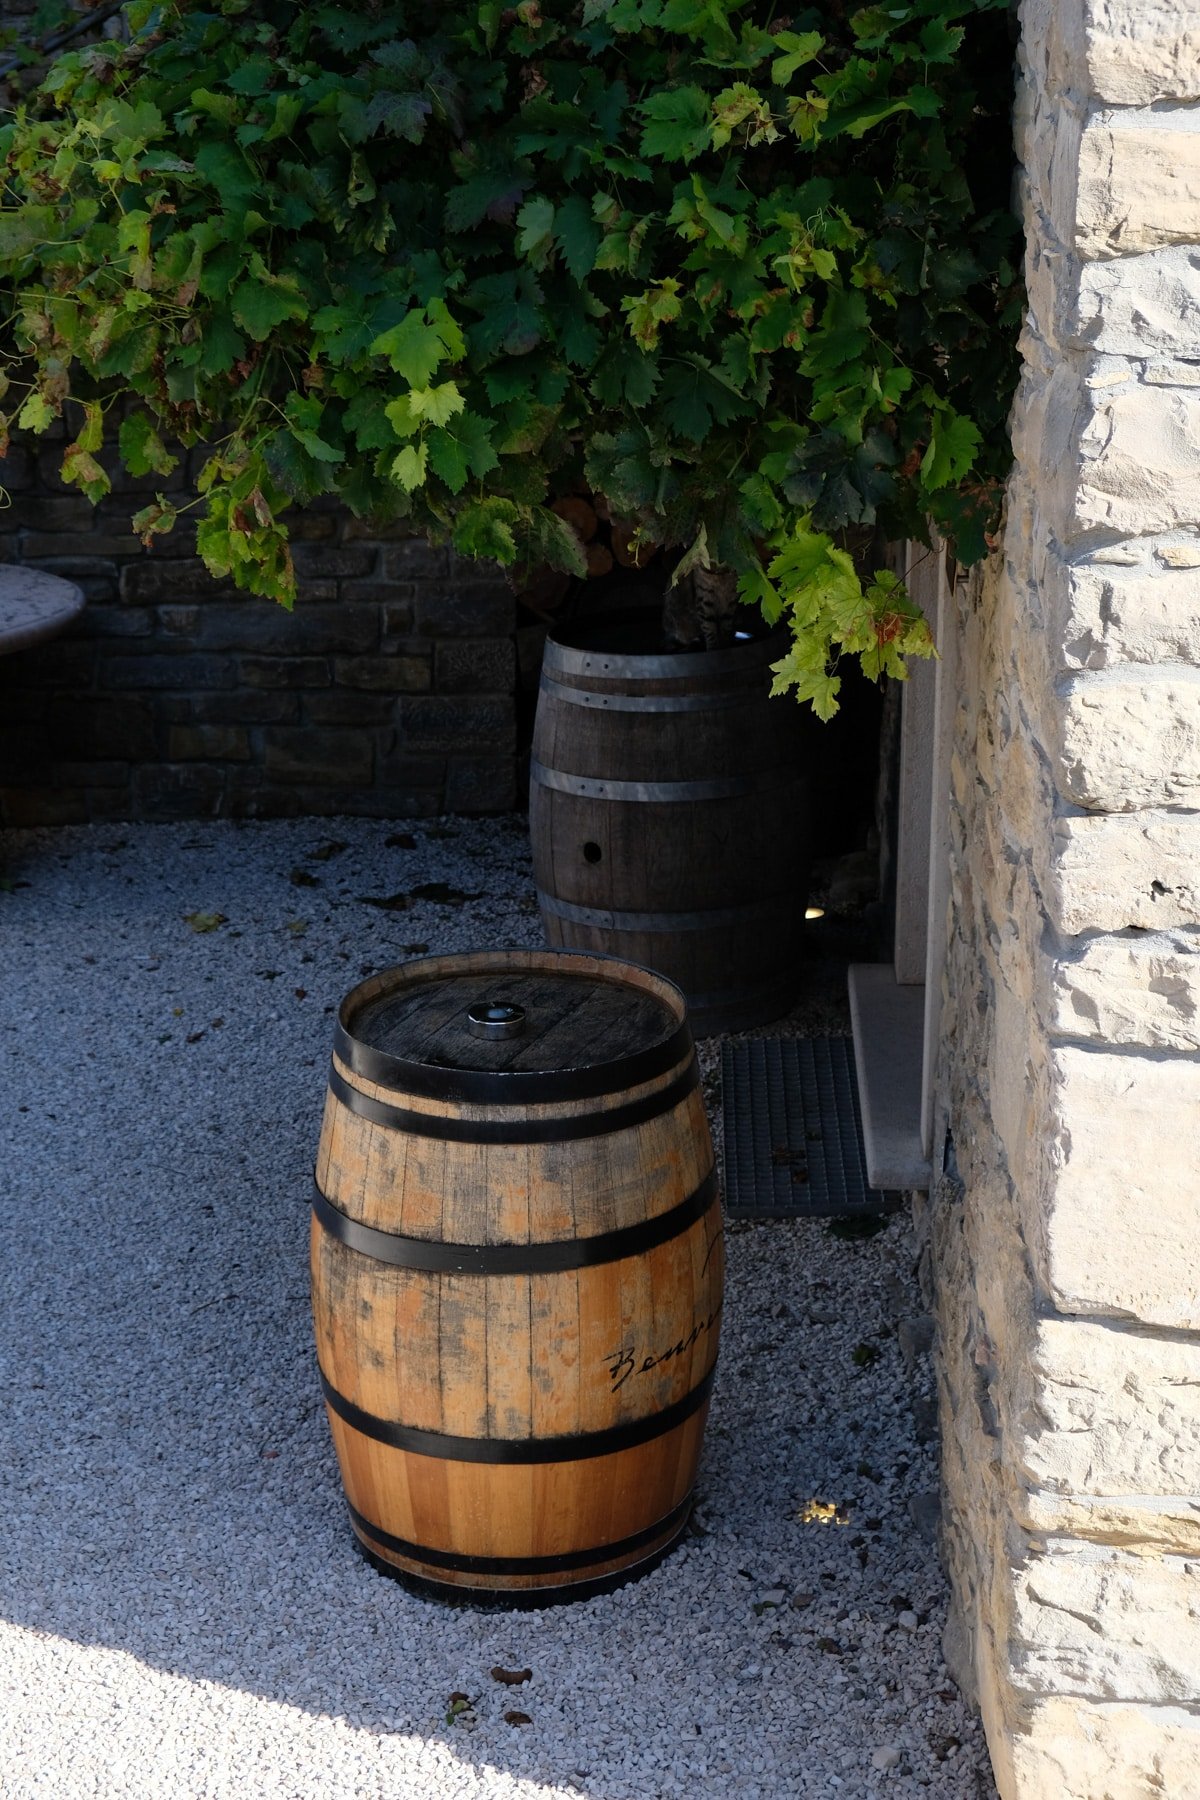 At Benvenuti Winery in Istria wooden barrel in front of a stone wall.